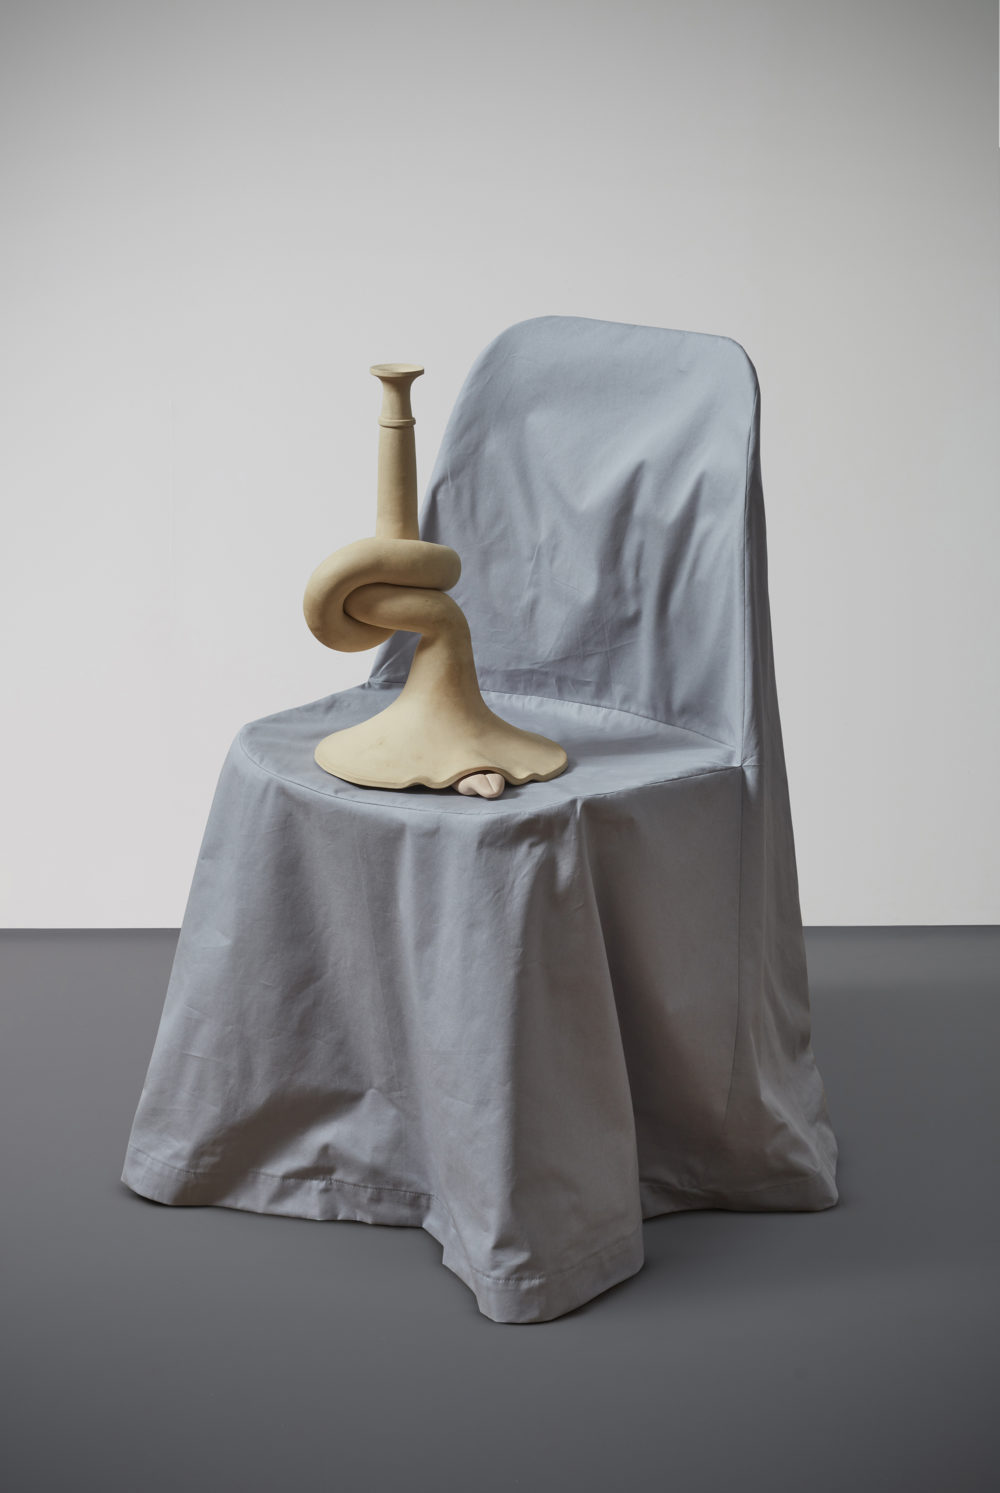 Small sculptural object on a gray chair